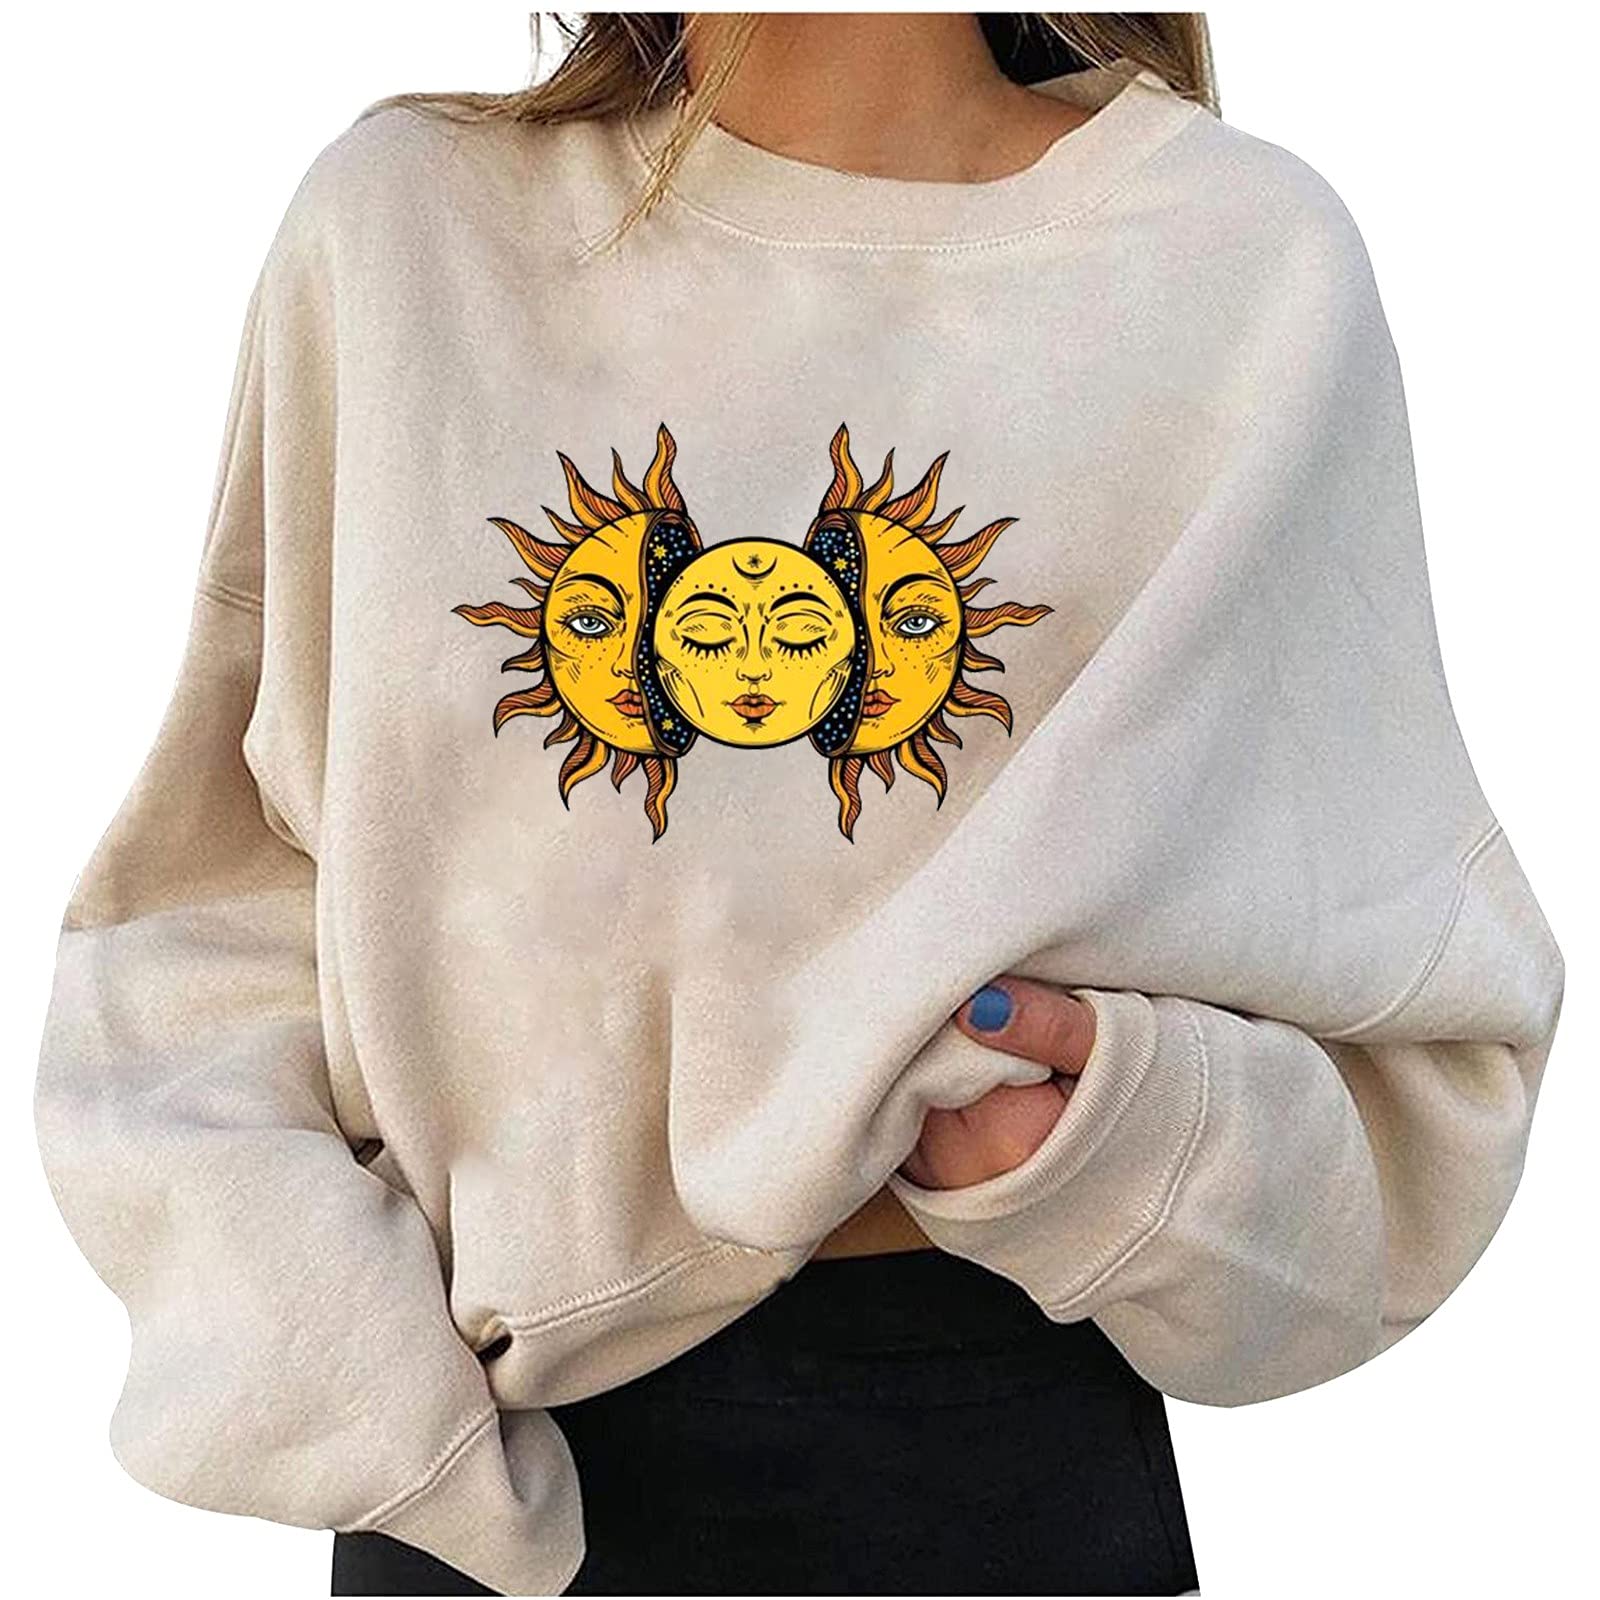 Buy Printed Cropped Boxy Sweatshirt with Crew Neck and Long Sleeves